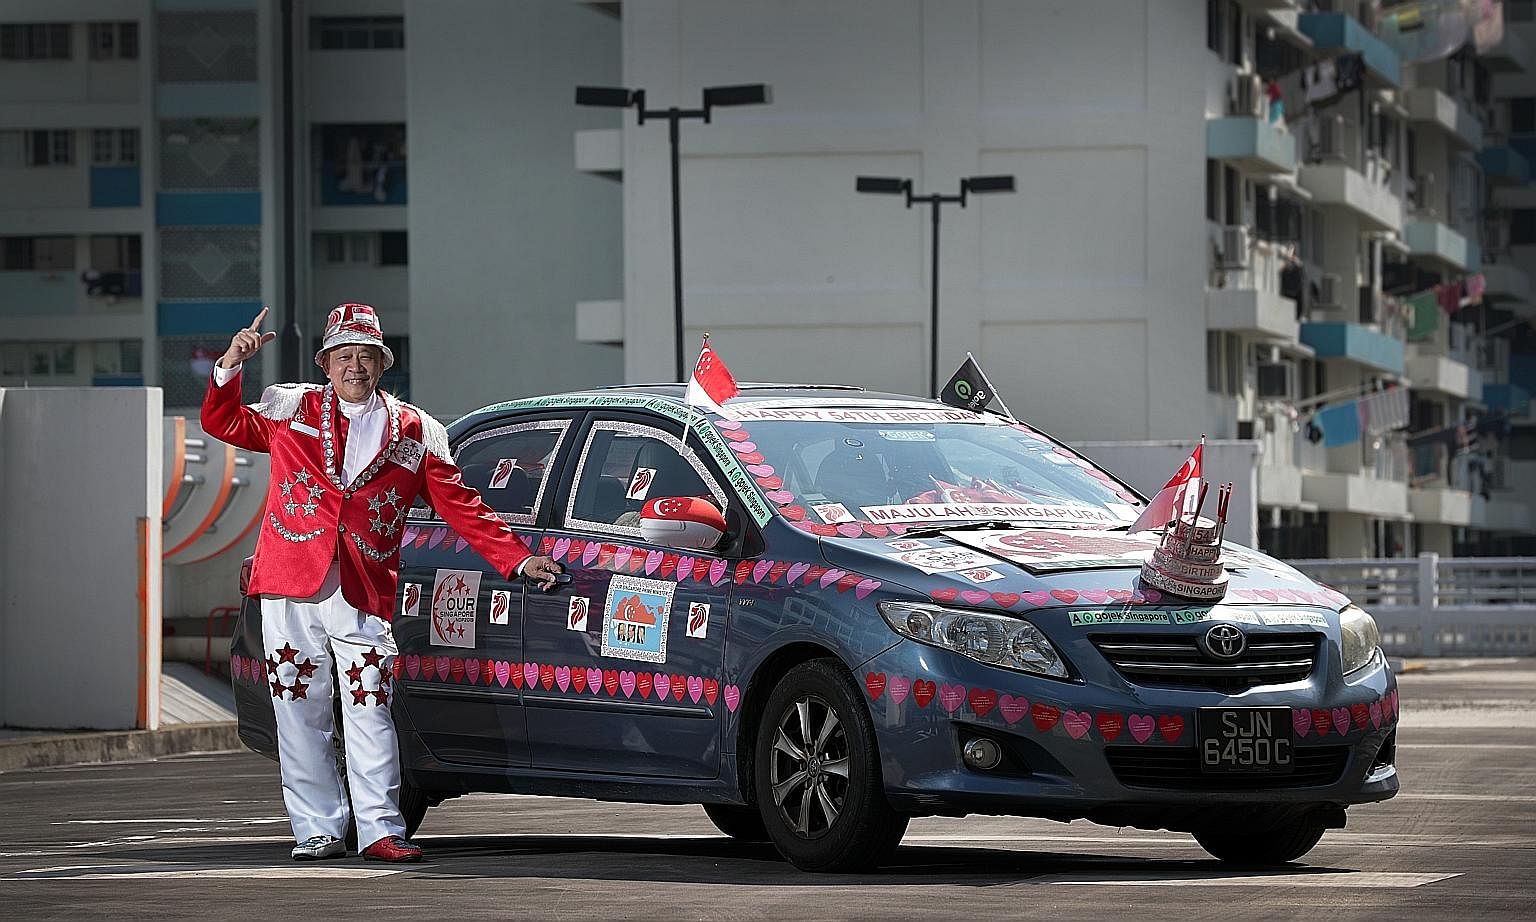 Gojek driver Henry Ho, who has been decorating his car and customising outfits for National Day for more than 10 years, made a birthday cake model to install at the front of his car this year.